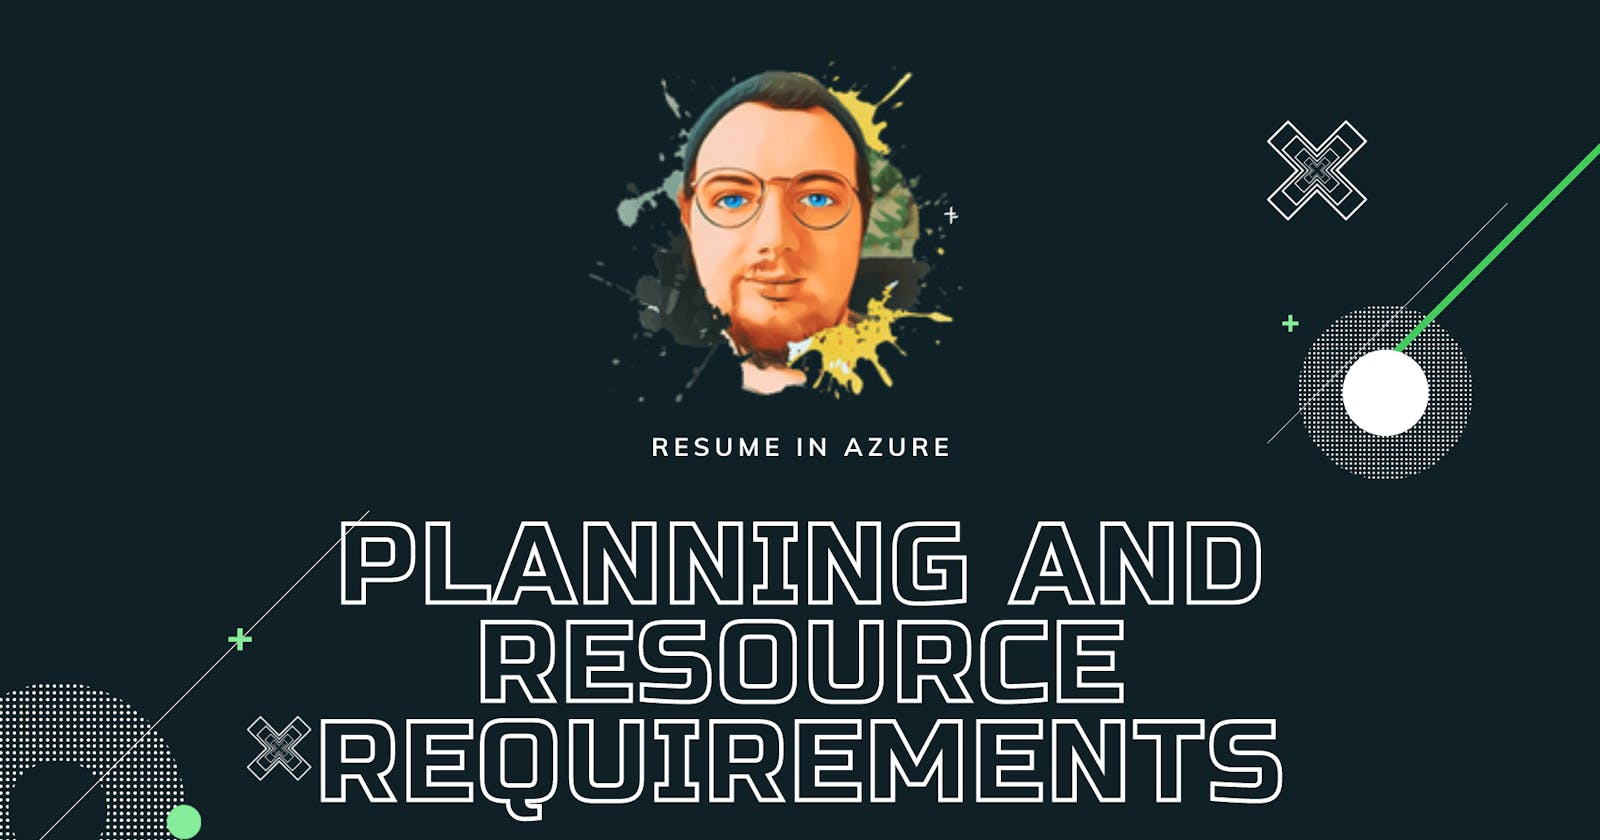 Resume in Azure #01: Planning and Resource Requirements